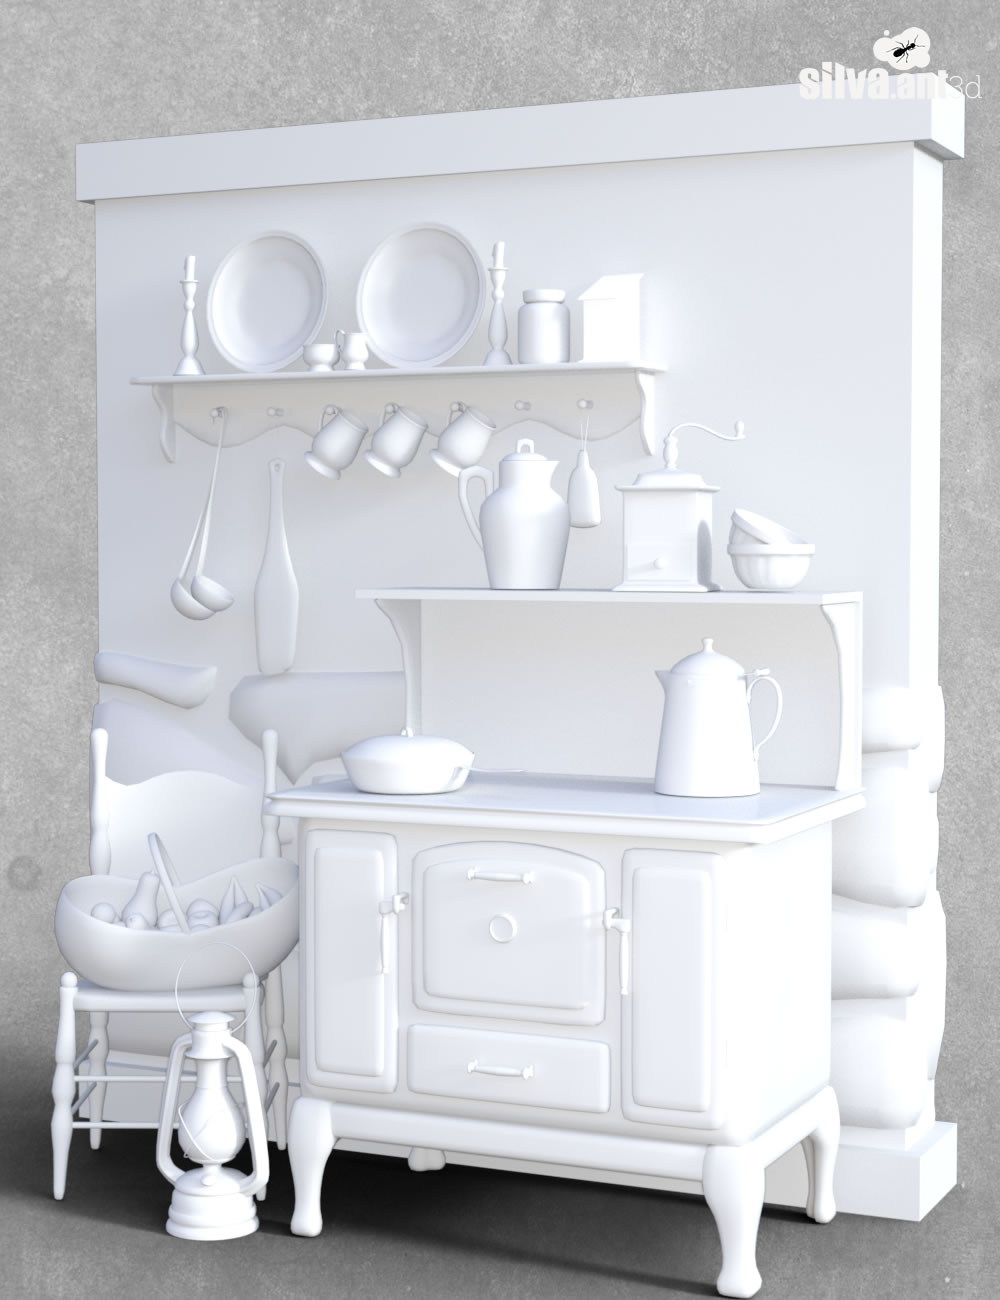 Pioneer Kitchen by: SilvaAnt3d, 3D Models by Daz 3D